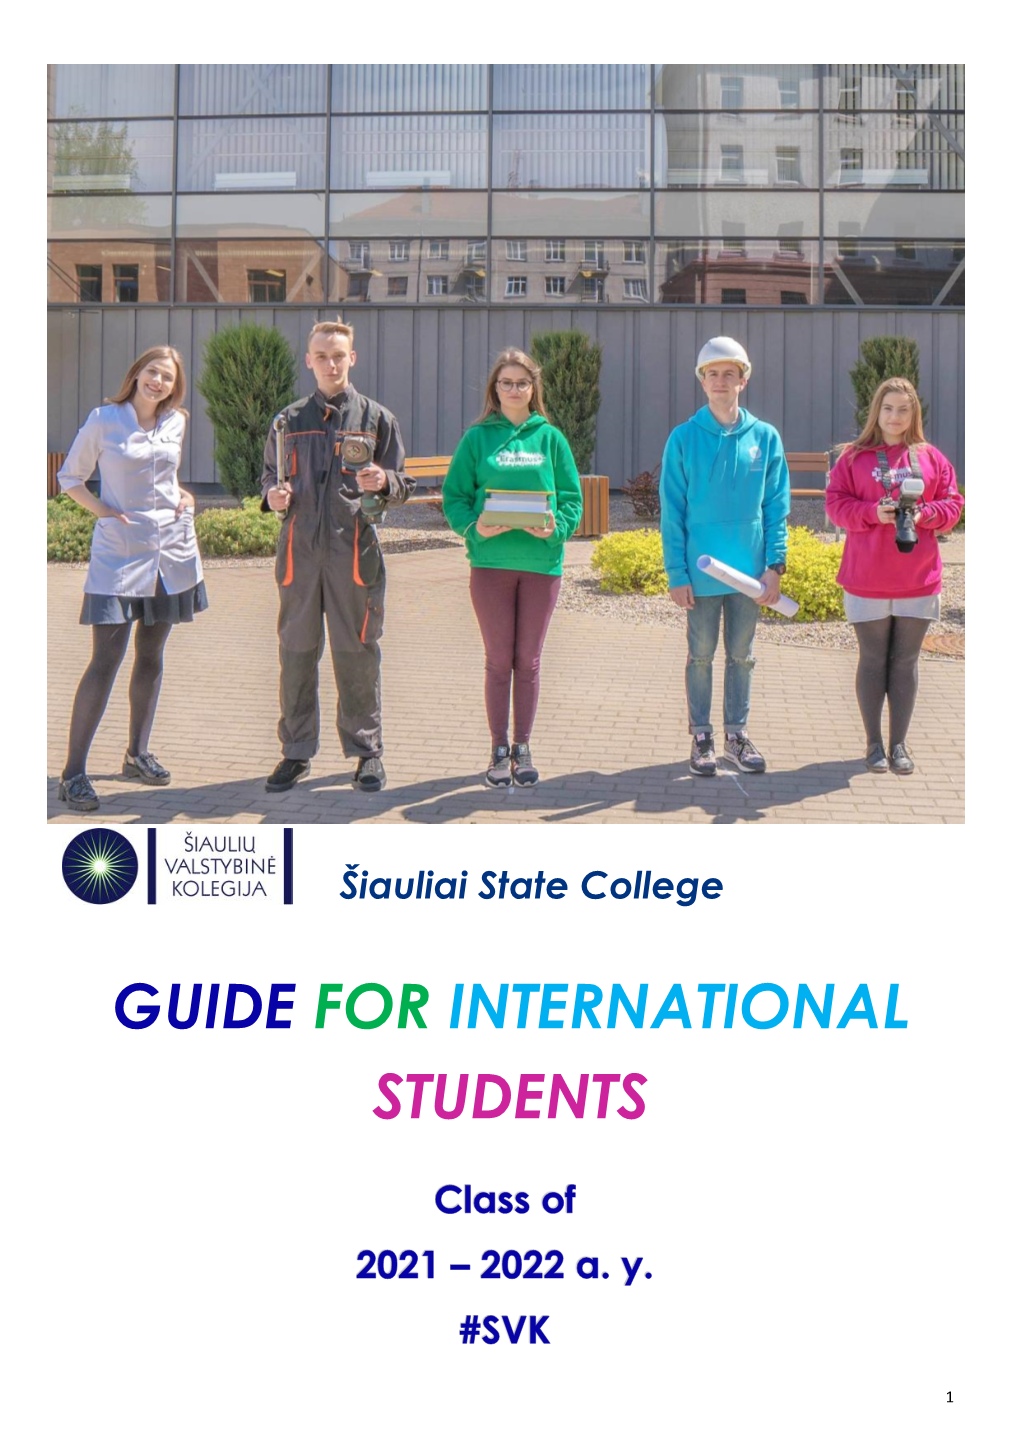 Guide for Incoming Students (2021-2022)